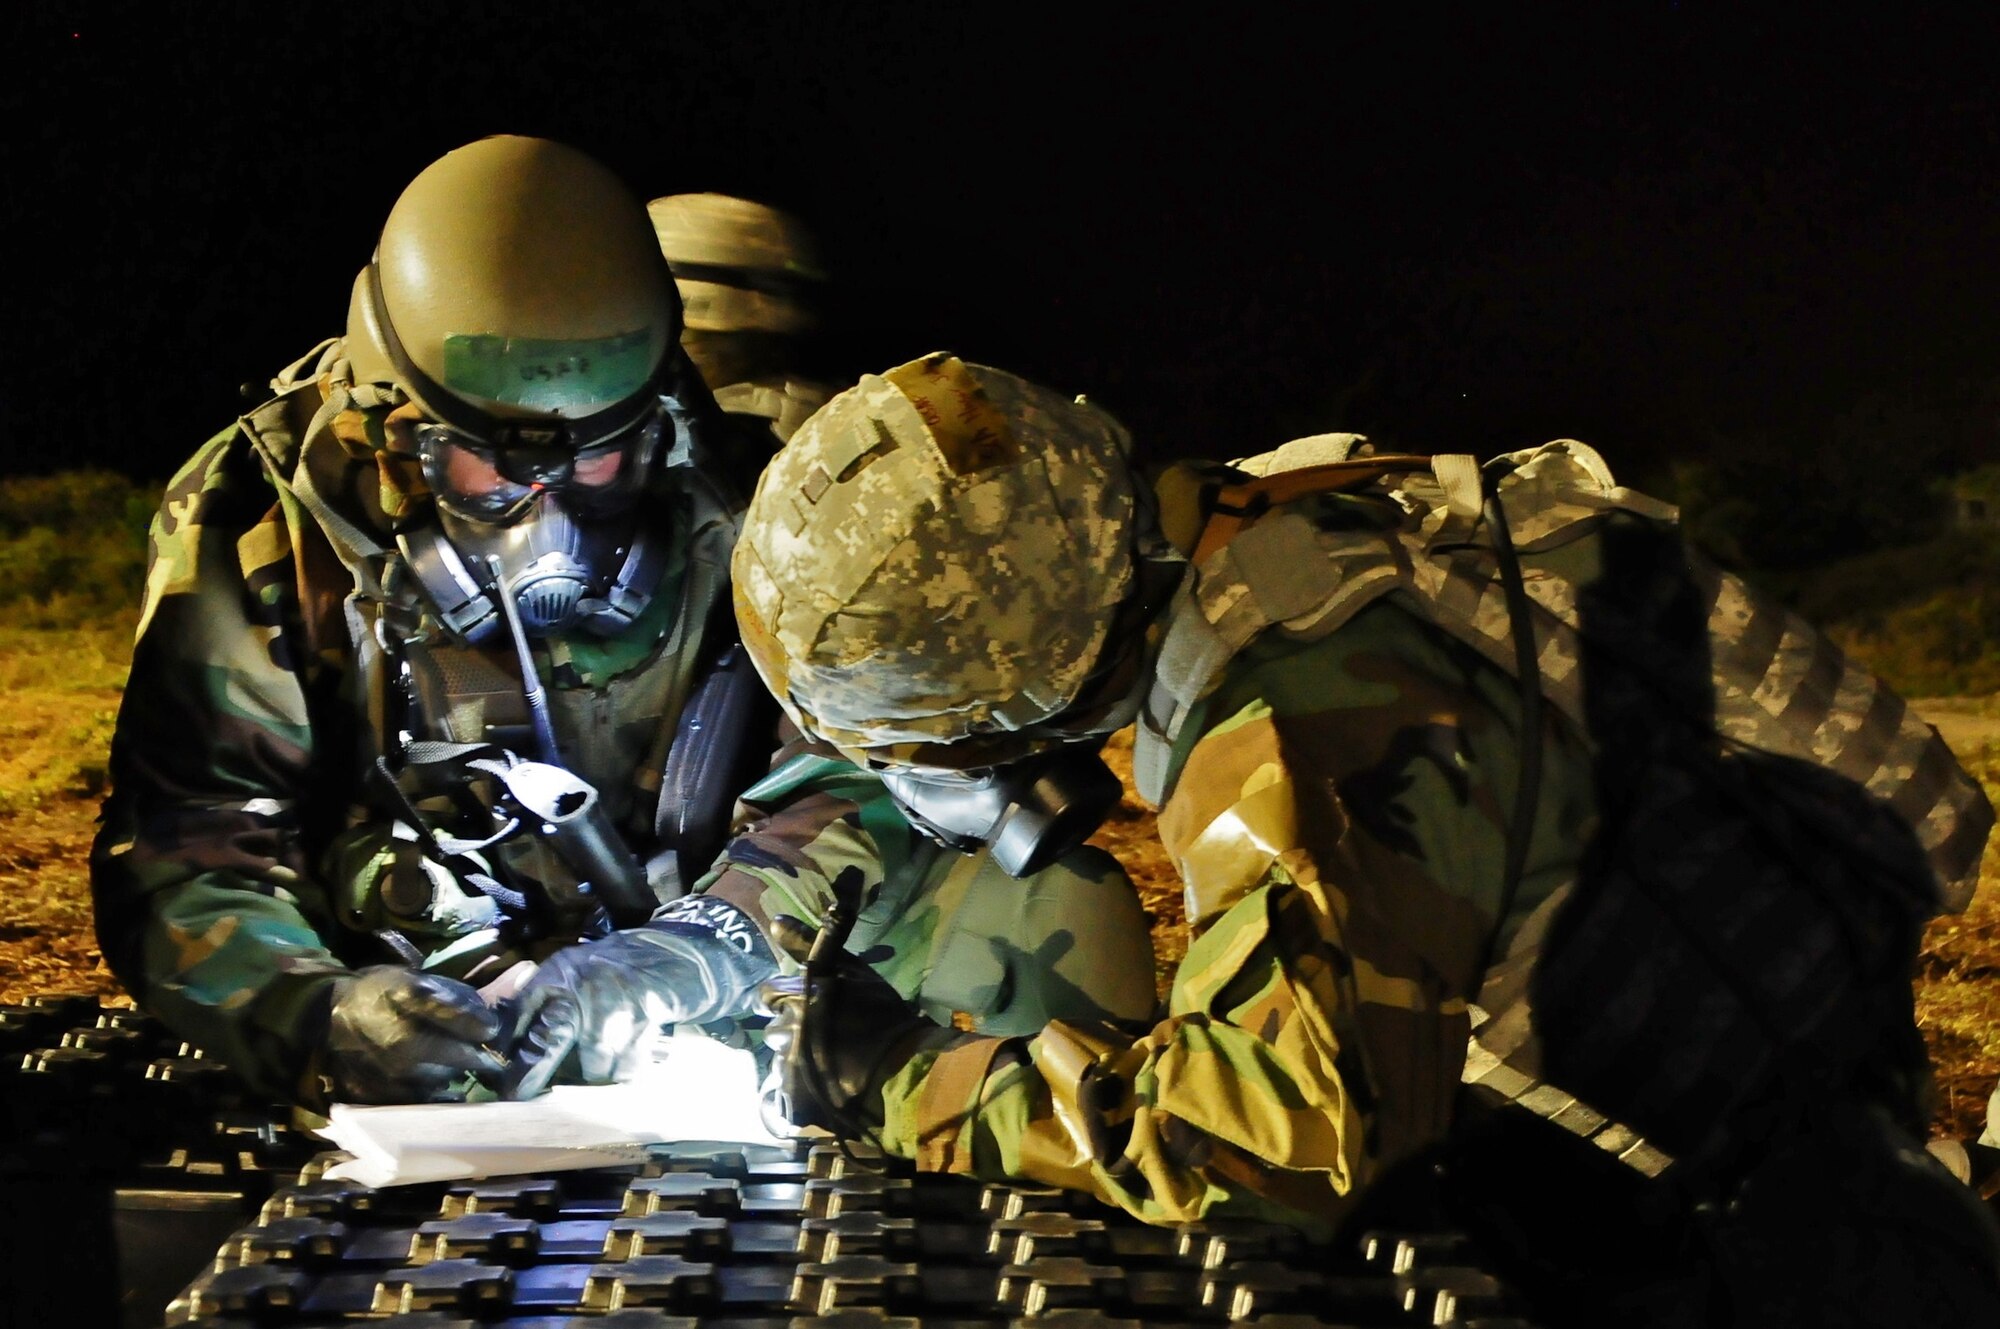 The 644th Combat Communication Squadron night shift members take accountability after a simulated chemical attack, April 24. Security and asset protection is some of the main responsibilities of Airmen assigned to the night shift in a deployed environment. (U.S. Air Force photo by Airman 1st Class Marianique Santos/Released)